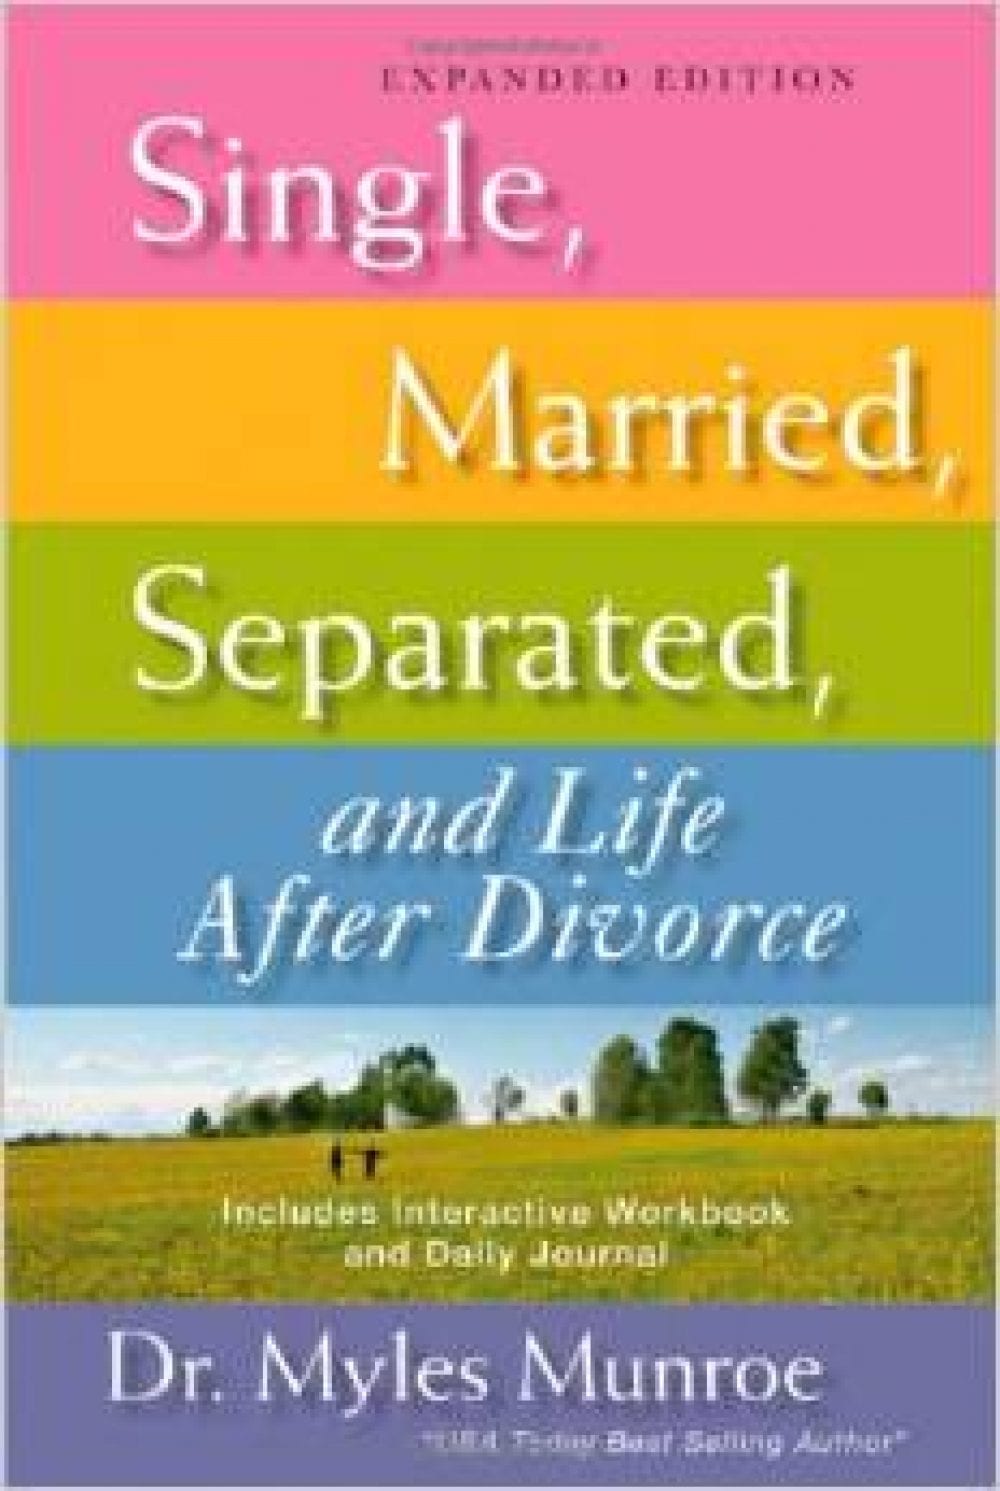 Single-Married-Separated-and-Divorce